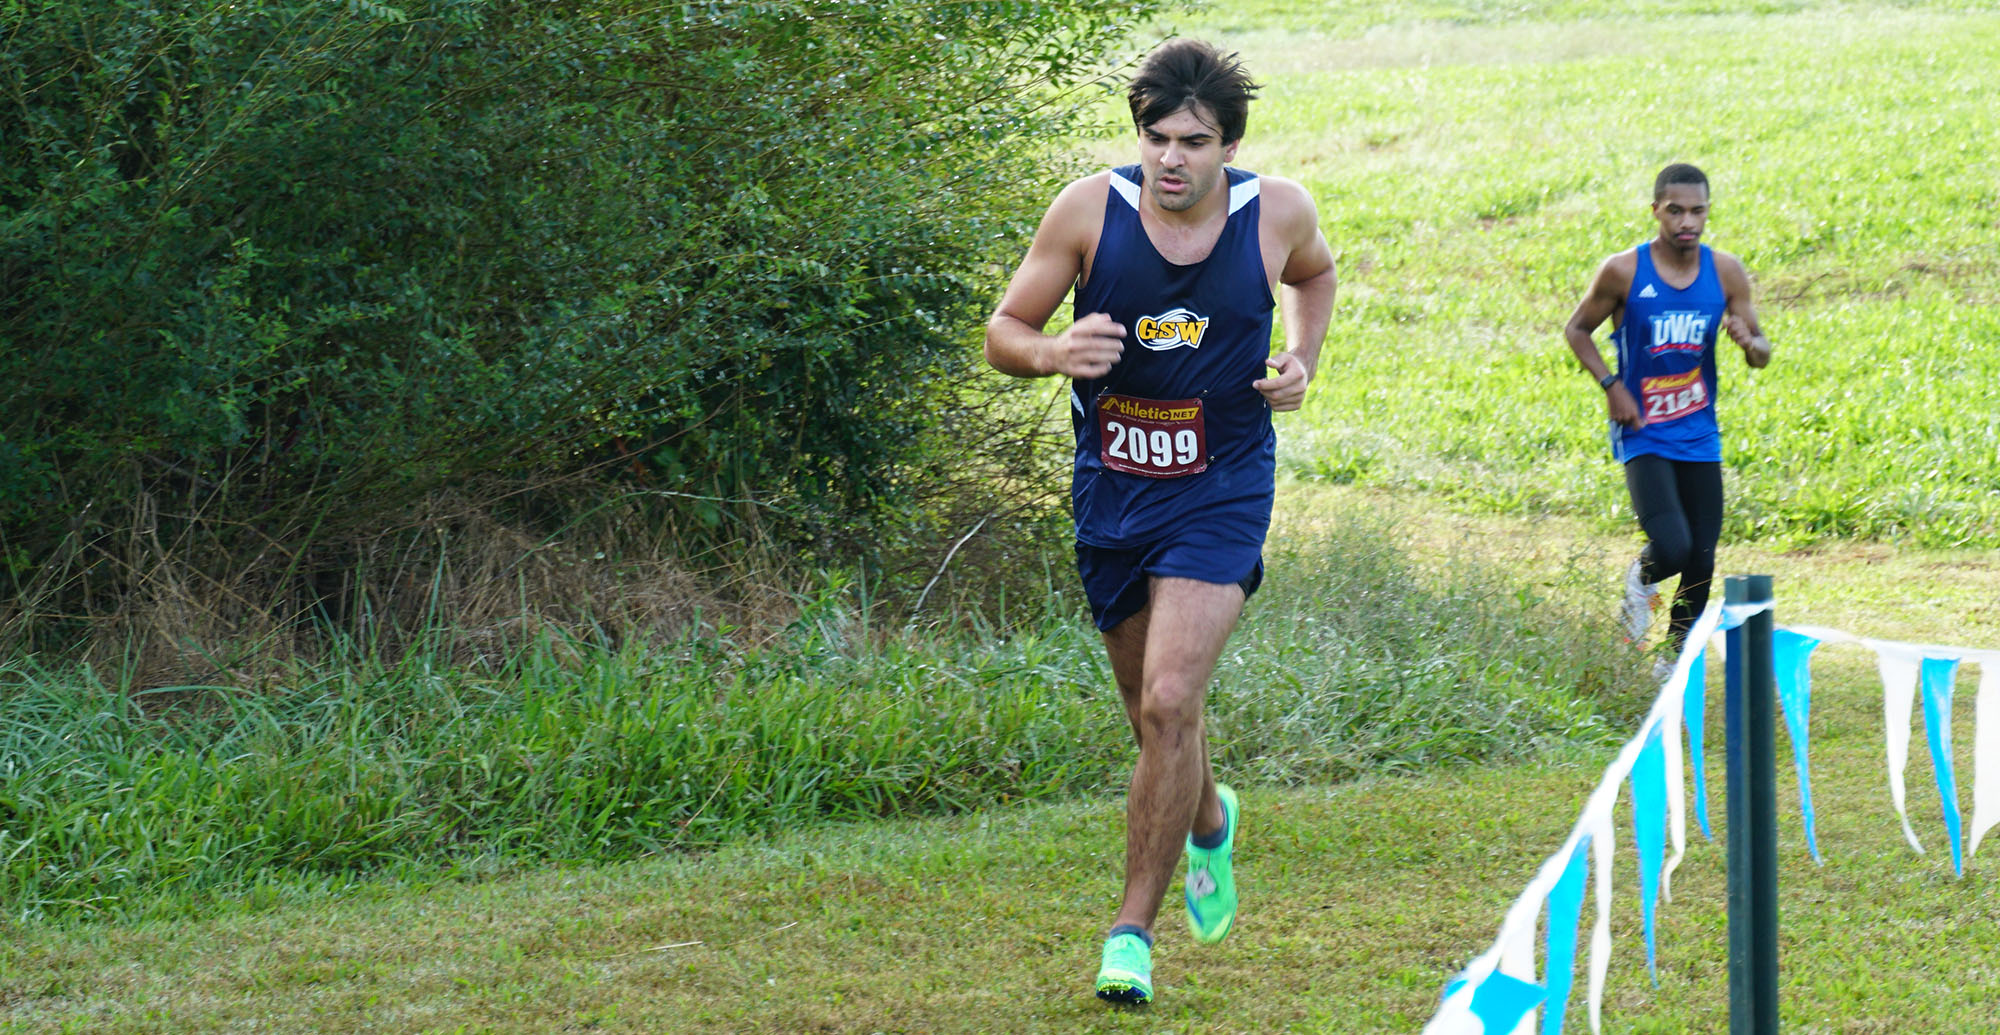 Hurricanes Finish Fifth at Willie Laster Meet